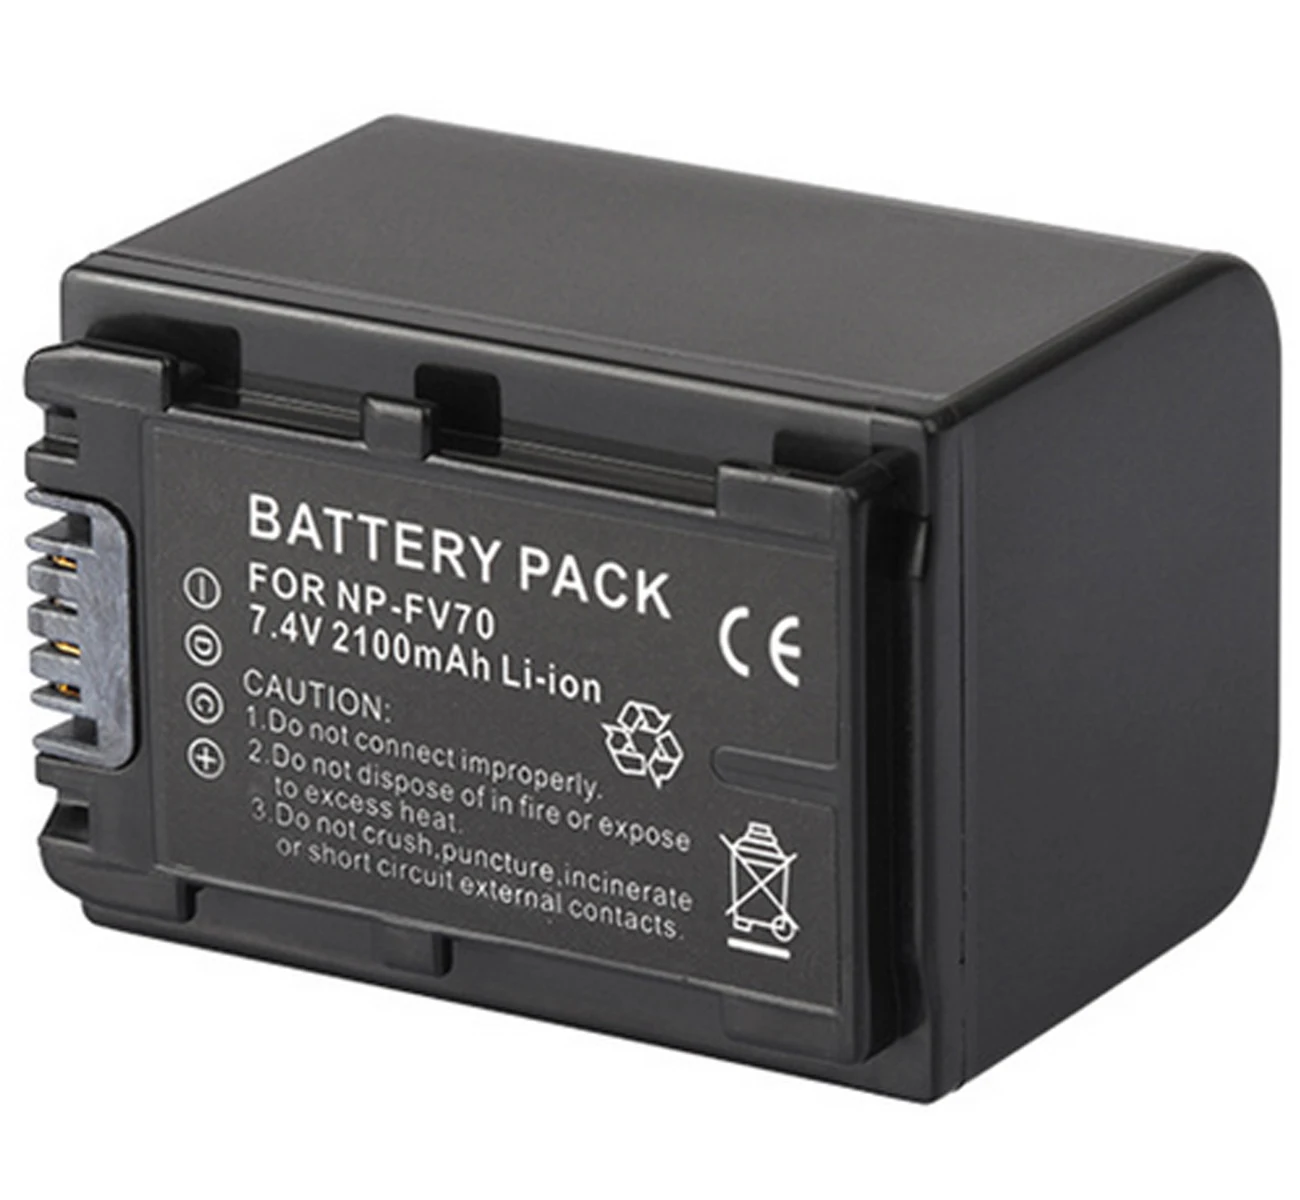 

NP-FV70 Battery Pack for Sony FDR-AX33, FDR-AX53, FDR-AXP35, NEX-VG10, NEX-VG20, NEX-VG30, NEX-VG900 Handycam Camcorder